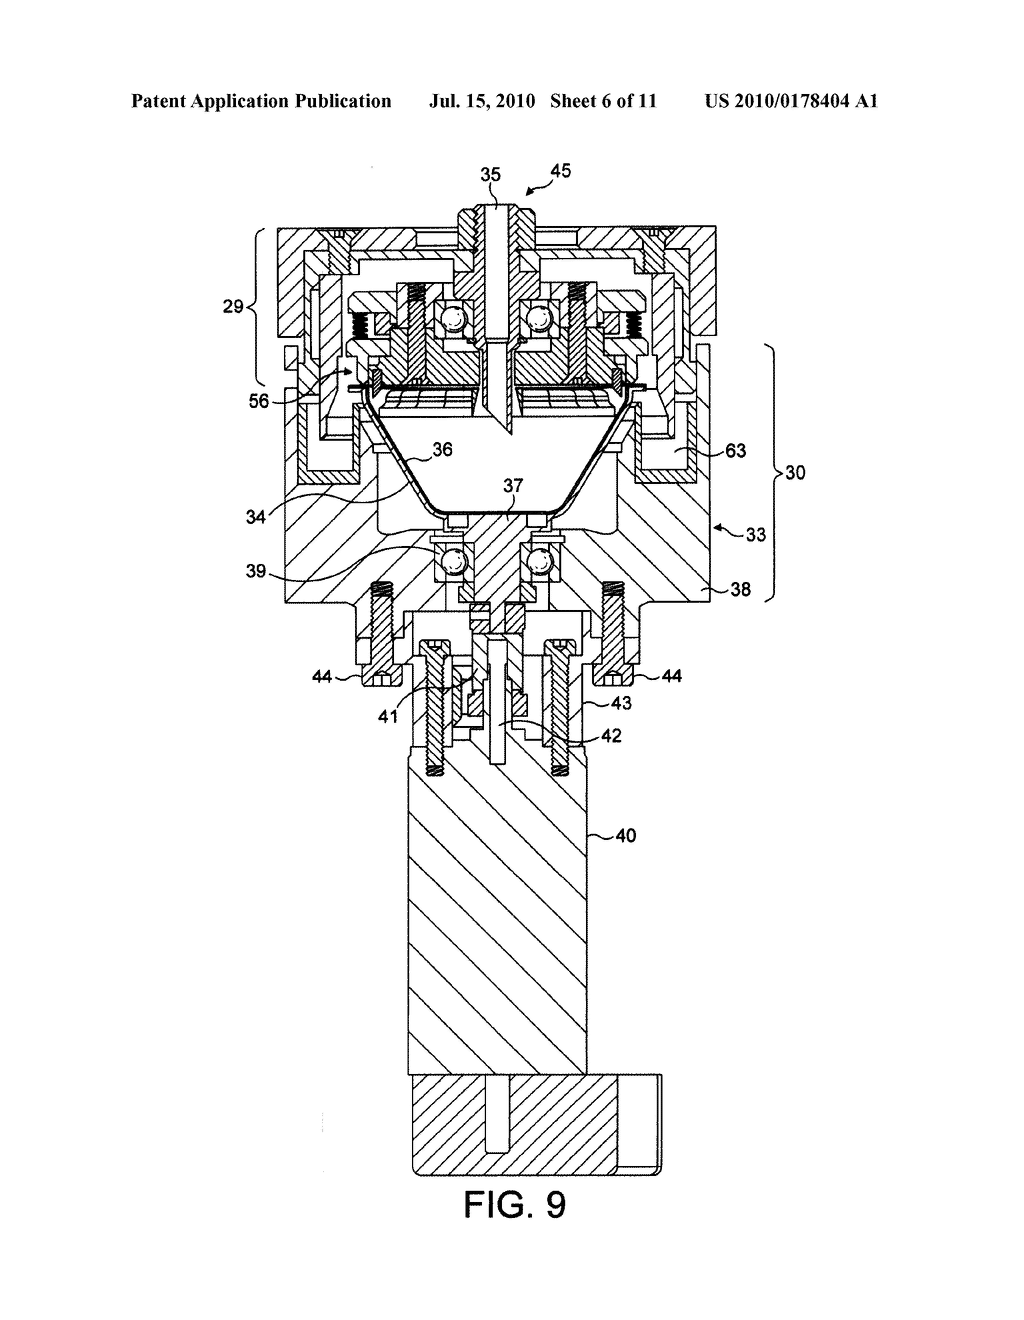 CAPSULE SYSTEM, DEVICE AND METHOD FOR PREPARING A FOOD LIQUID CONTAINED IN A RECEPTACLE BY CENTRIFUGATION - diagram, schematic, and image 07